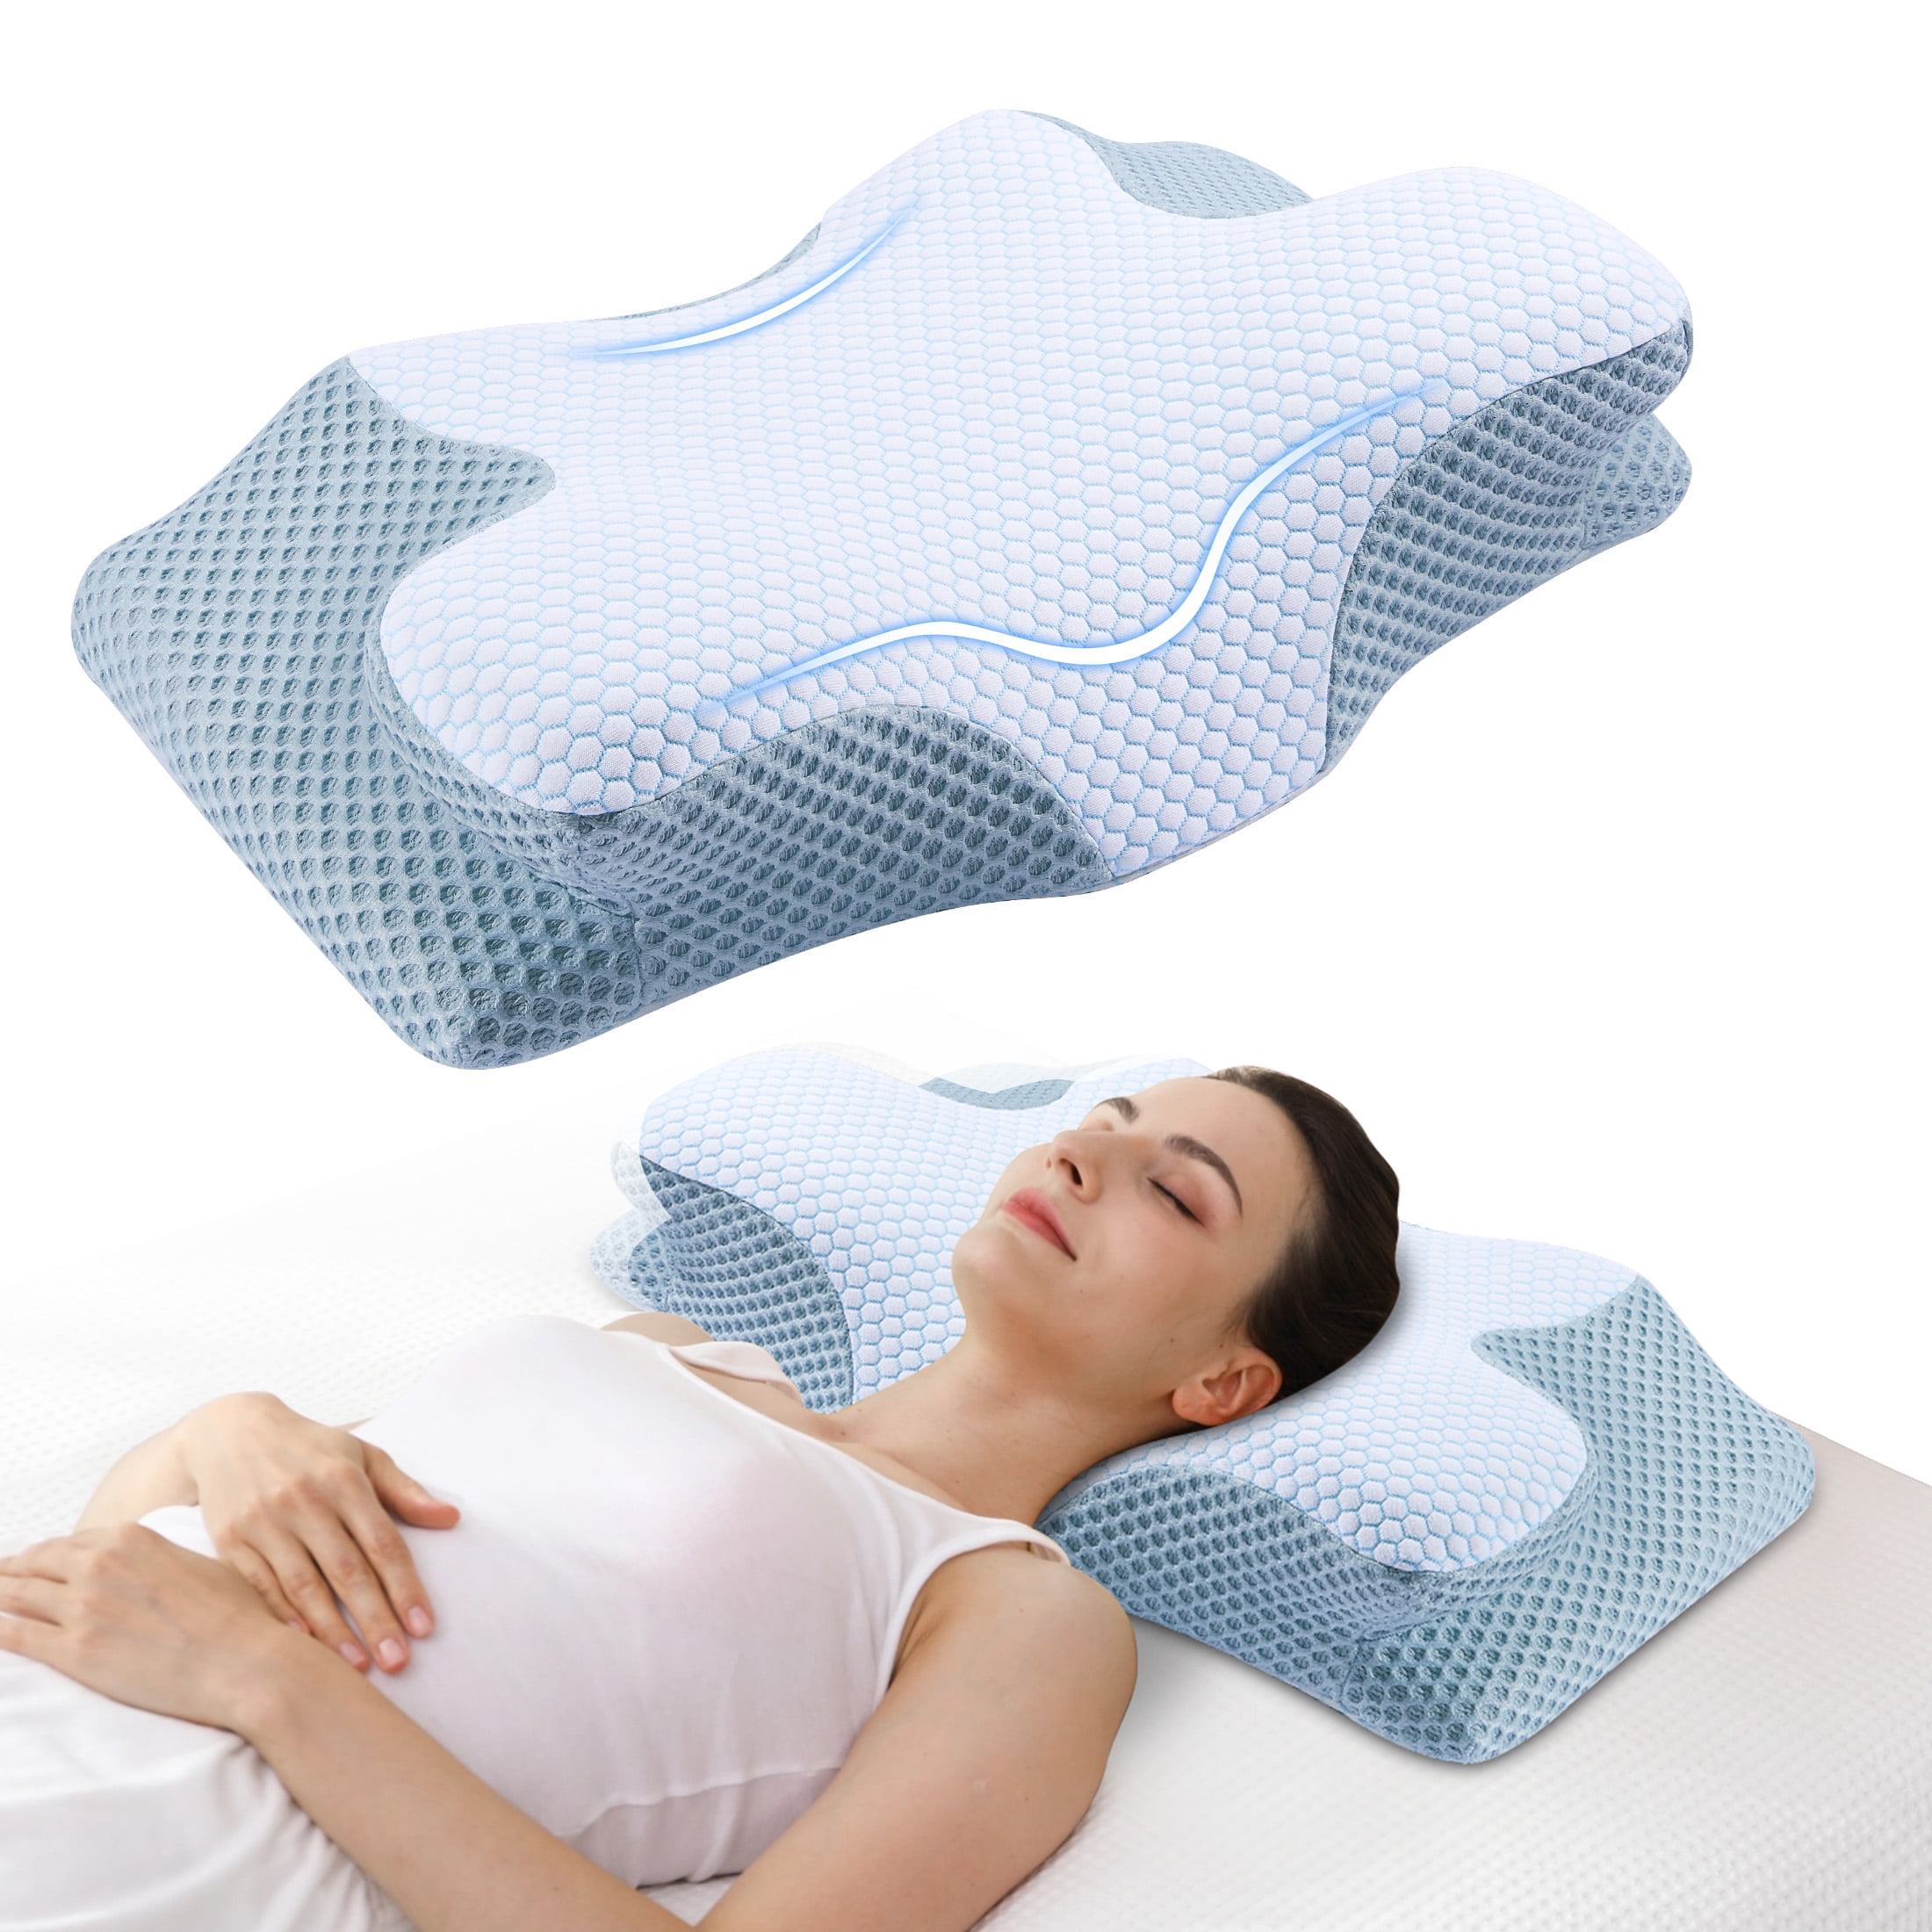 Adjustable Neck Pillows for Pain Relief Sleeping, Enhanced Ergonomic  Contour Shoulder Support, Cooling Cervical Memory Foam Pillows, No Smell  Orthopedic Bed Pillow for Side Back Stomach Sleeper